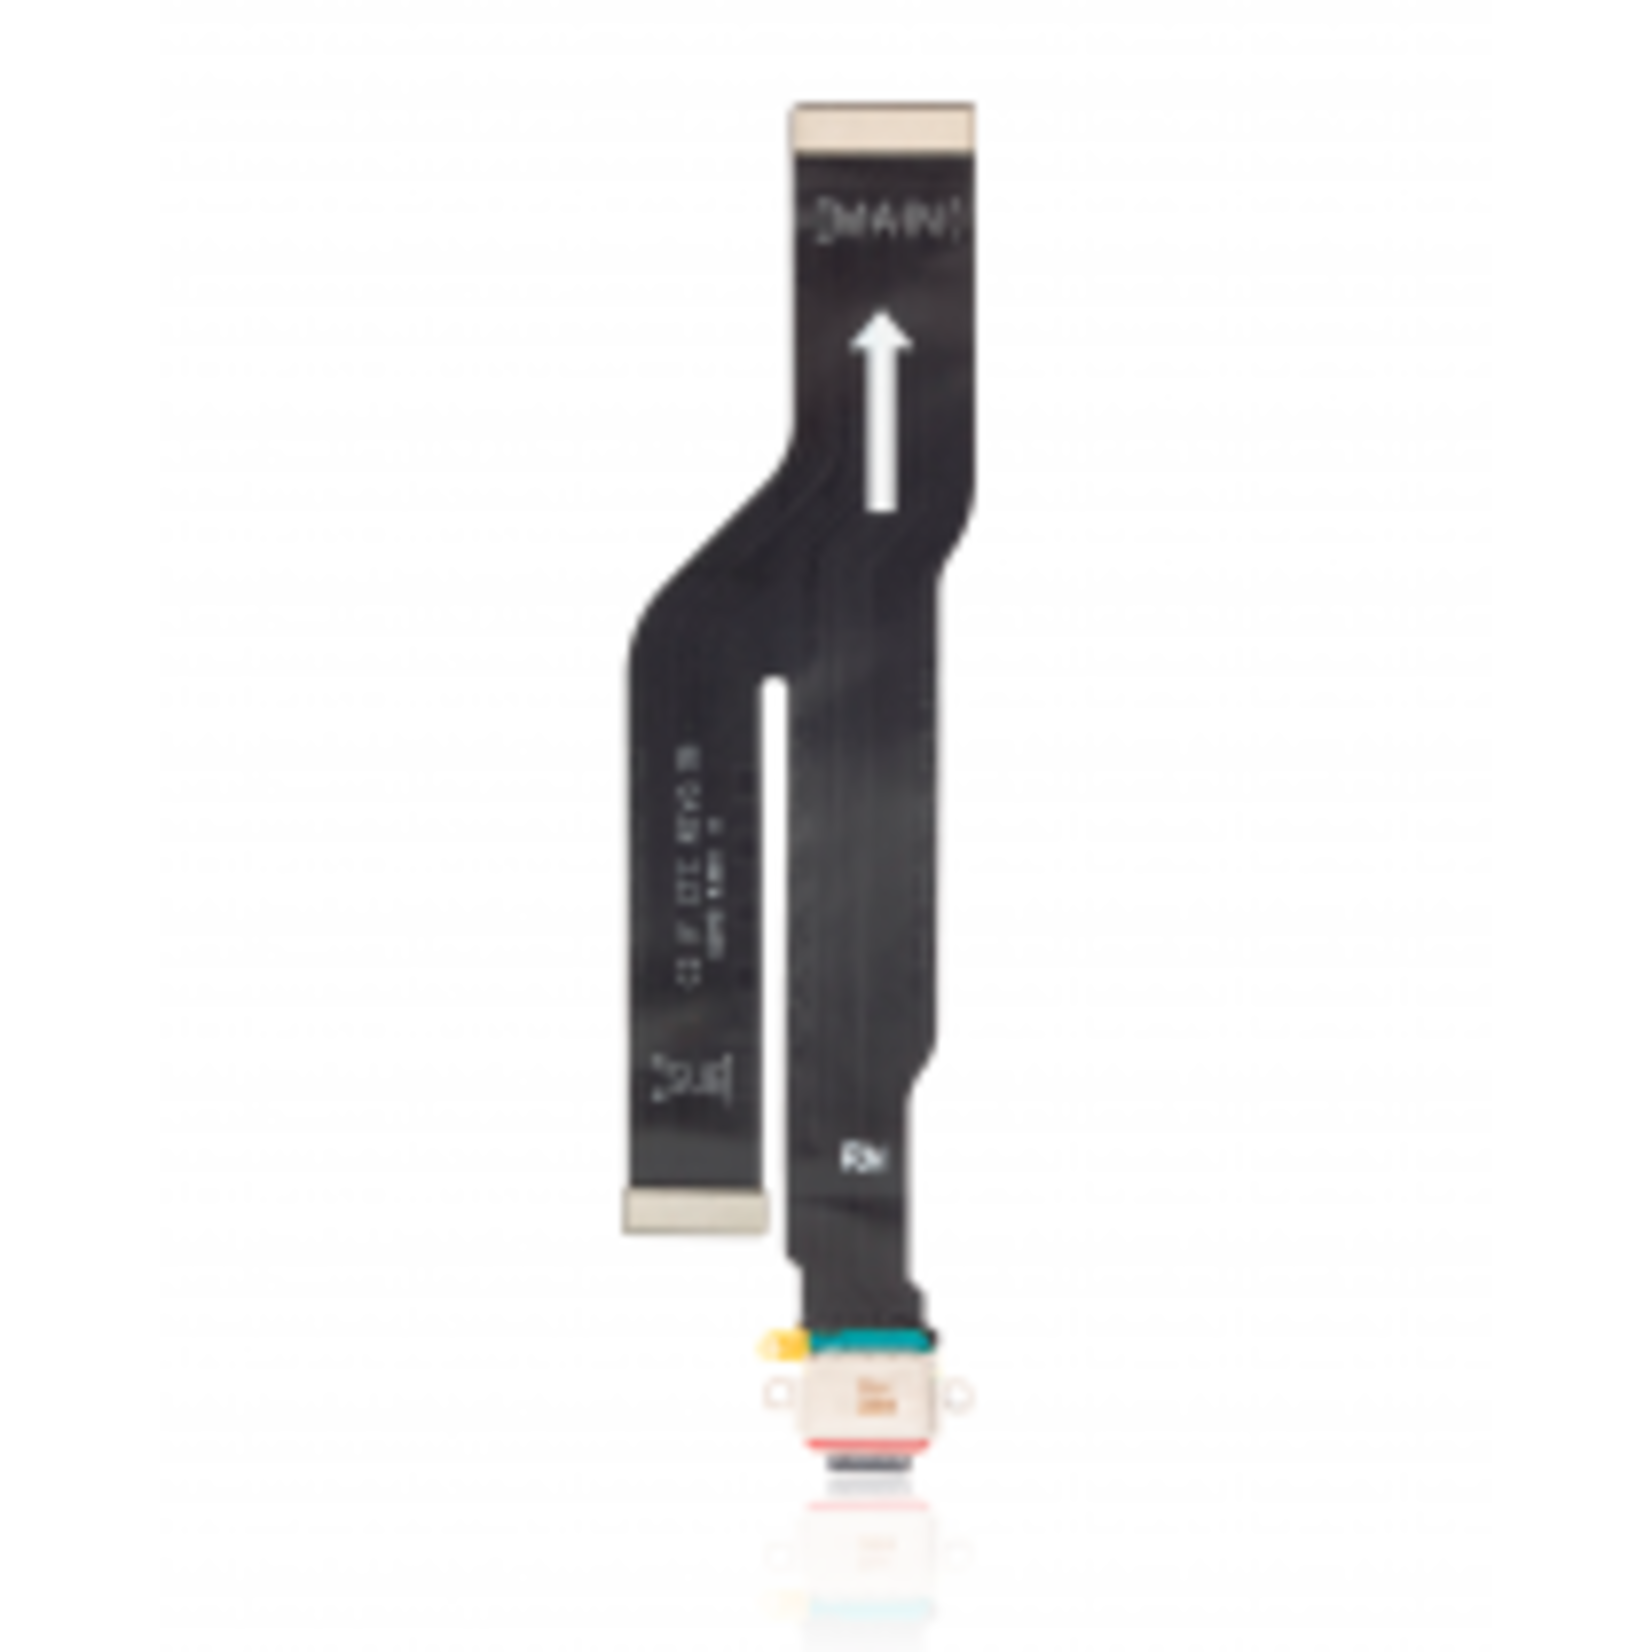 Samsung CHARGING PORT FLEX CABLE FOR SAMSUNG NOTE 20 ULTRA 5G